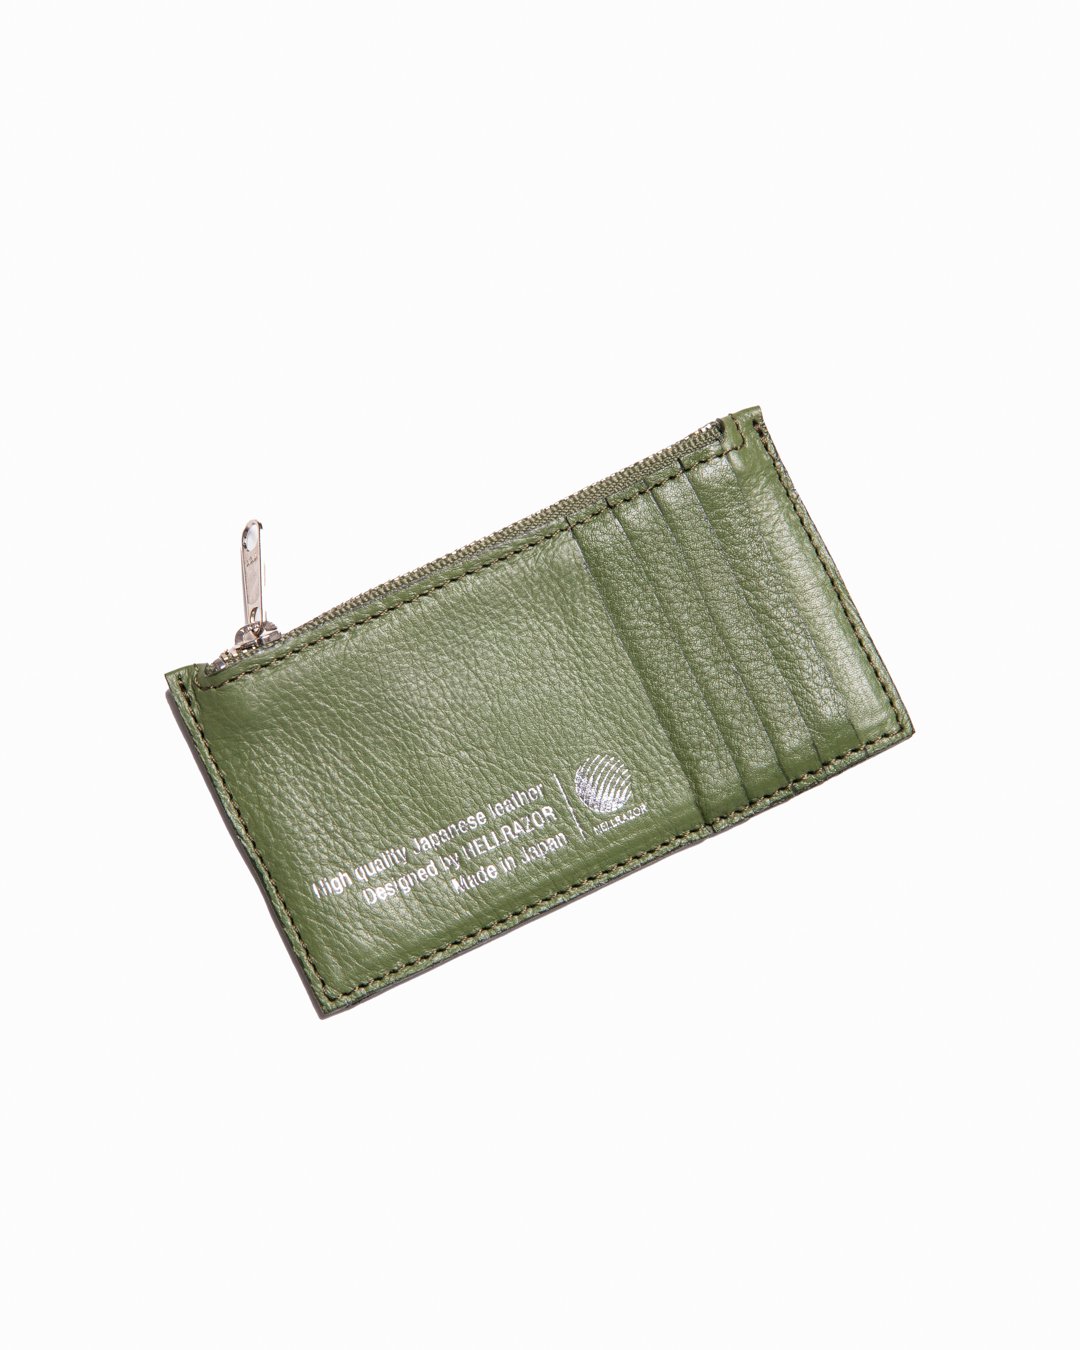 HELLRAZOR [ヘルレイザー] | LEATHER WALLET - Green, Black